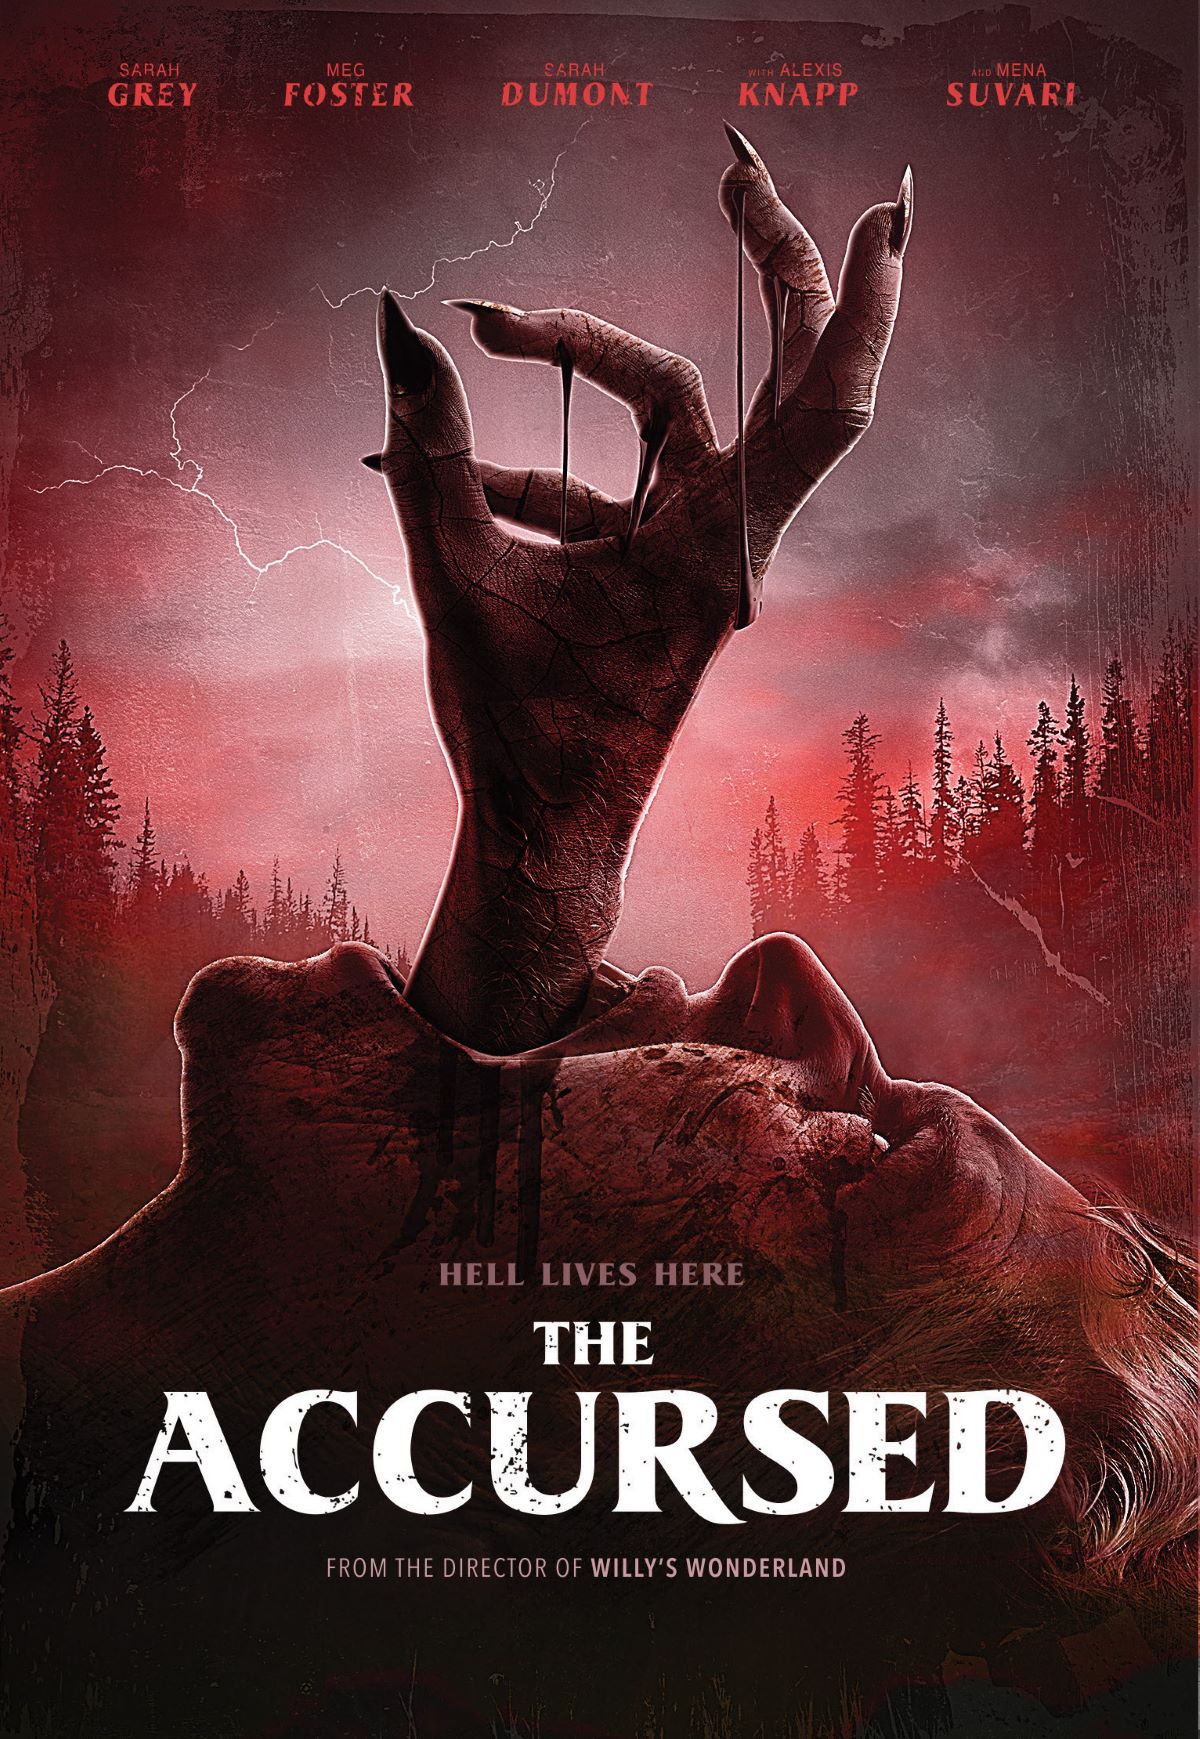 Accursed (DVD) - image 3 of 3